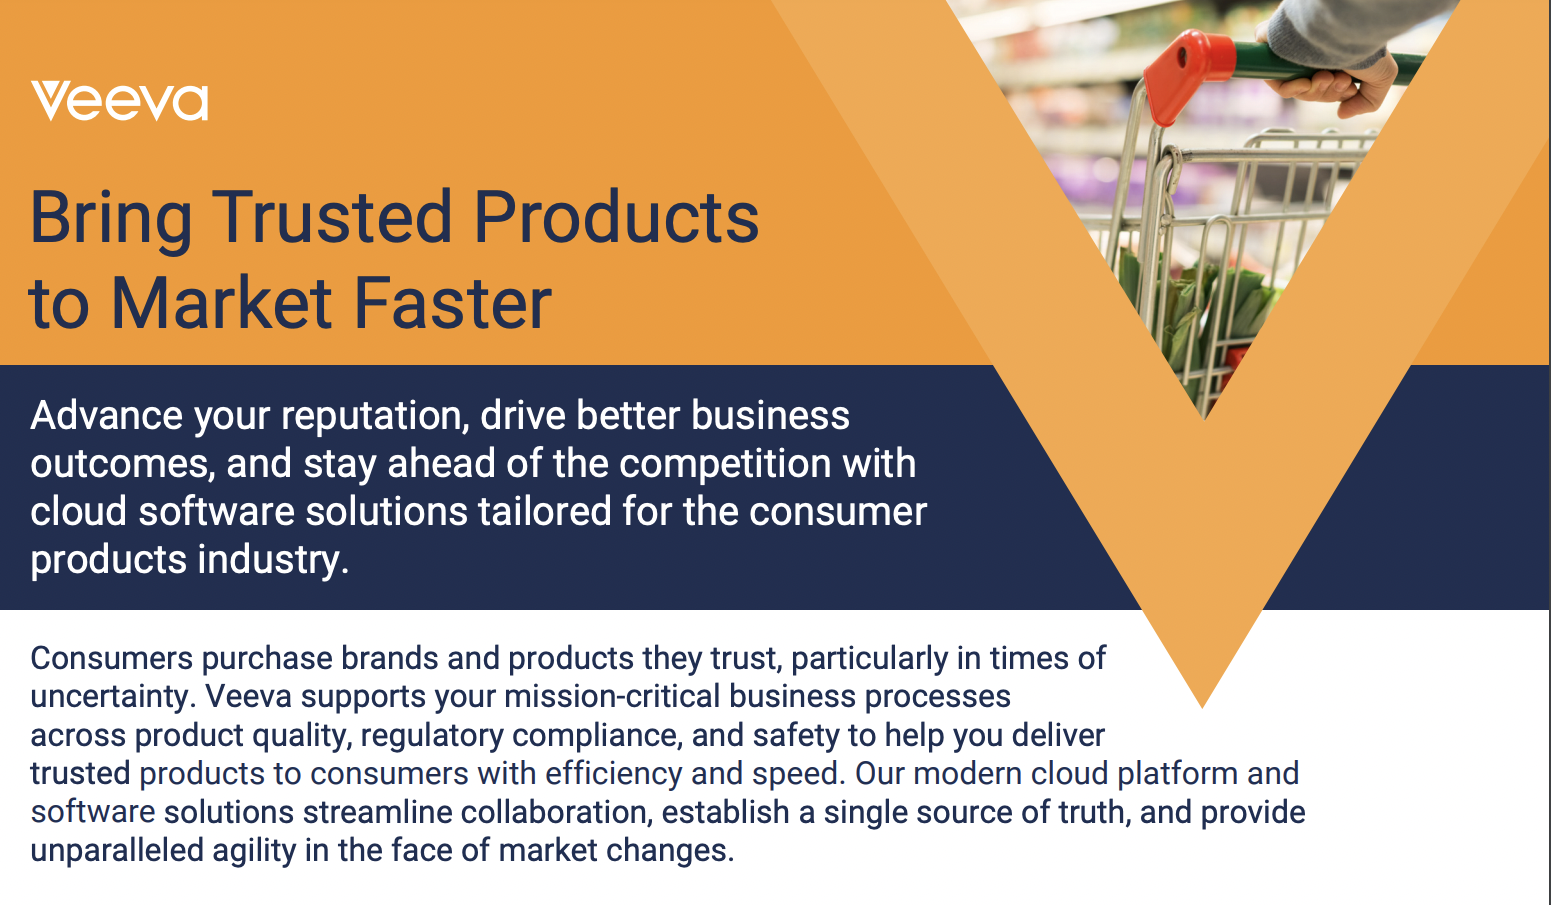 Bring Trusted Products to Market Faster